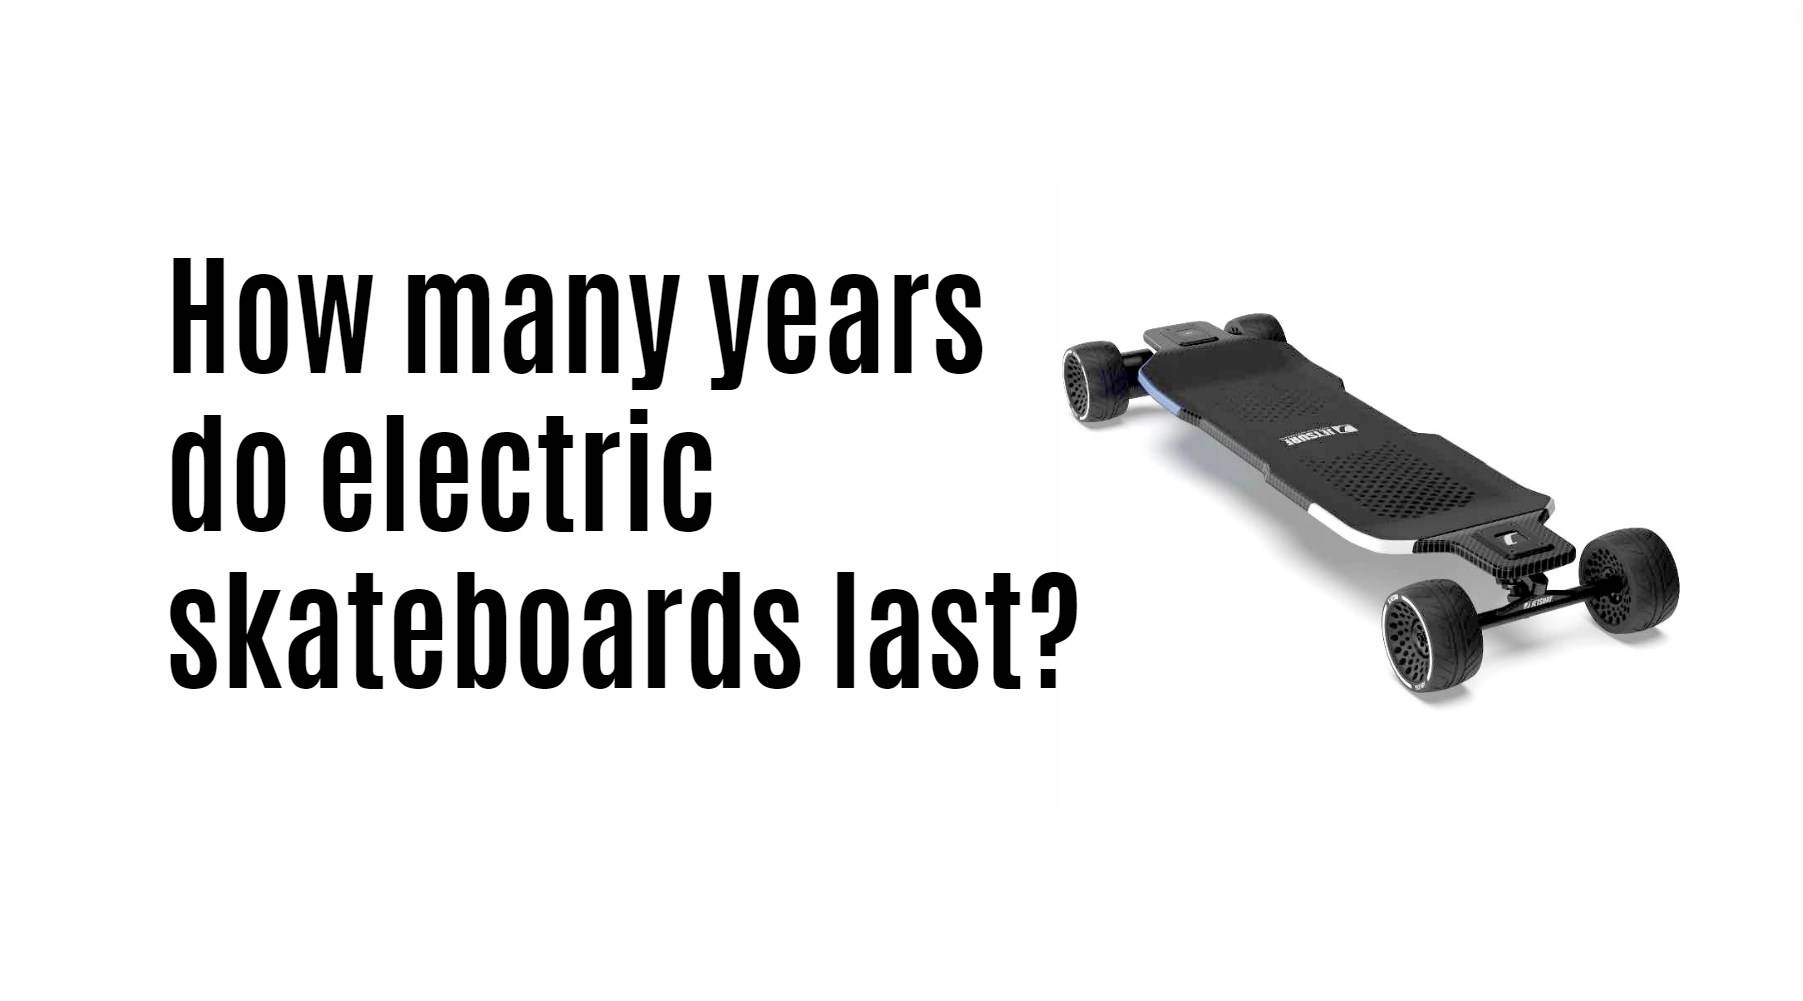 How many years do electric skateboards last?